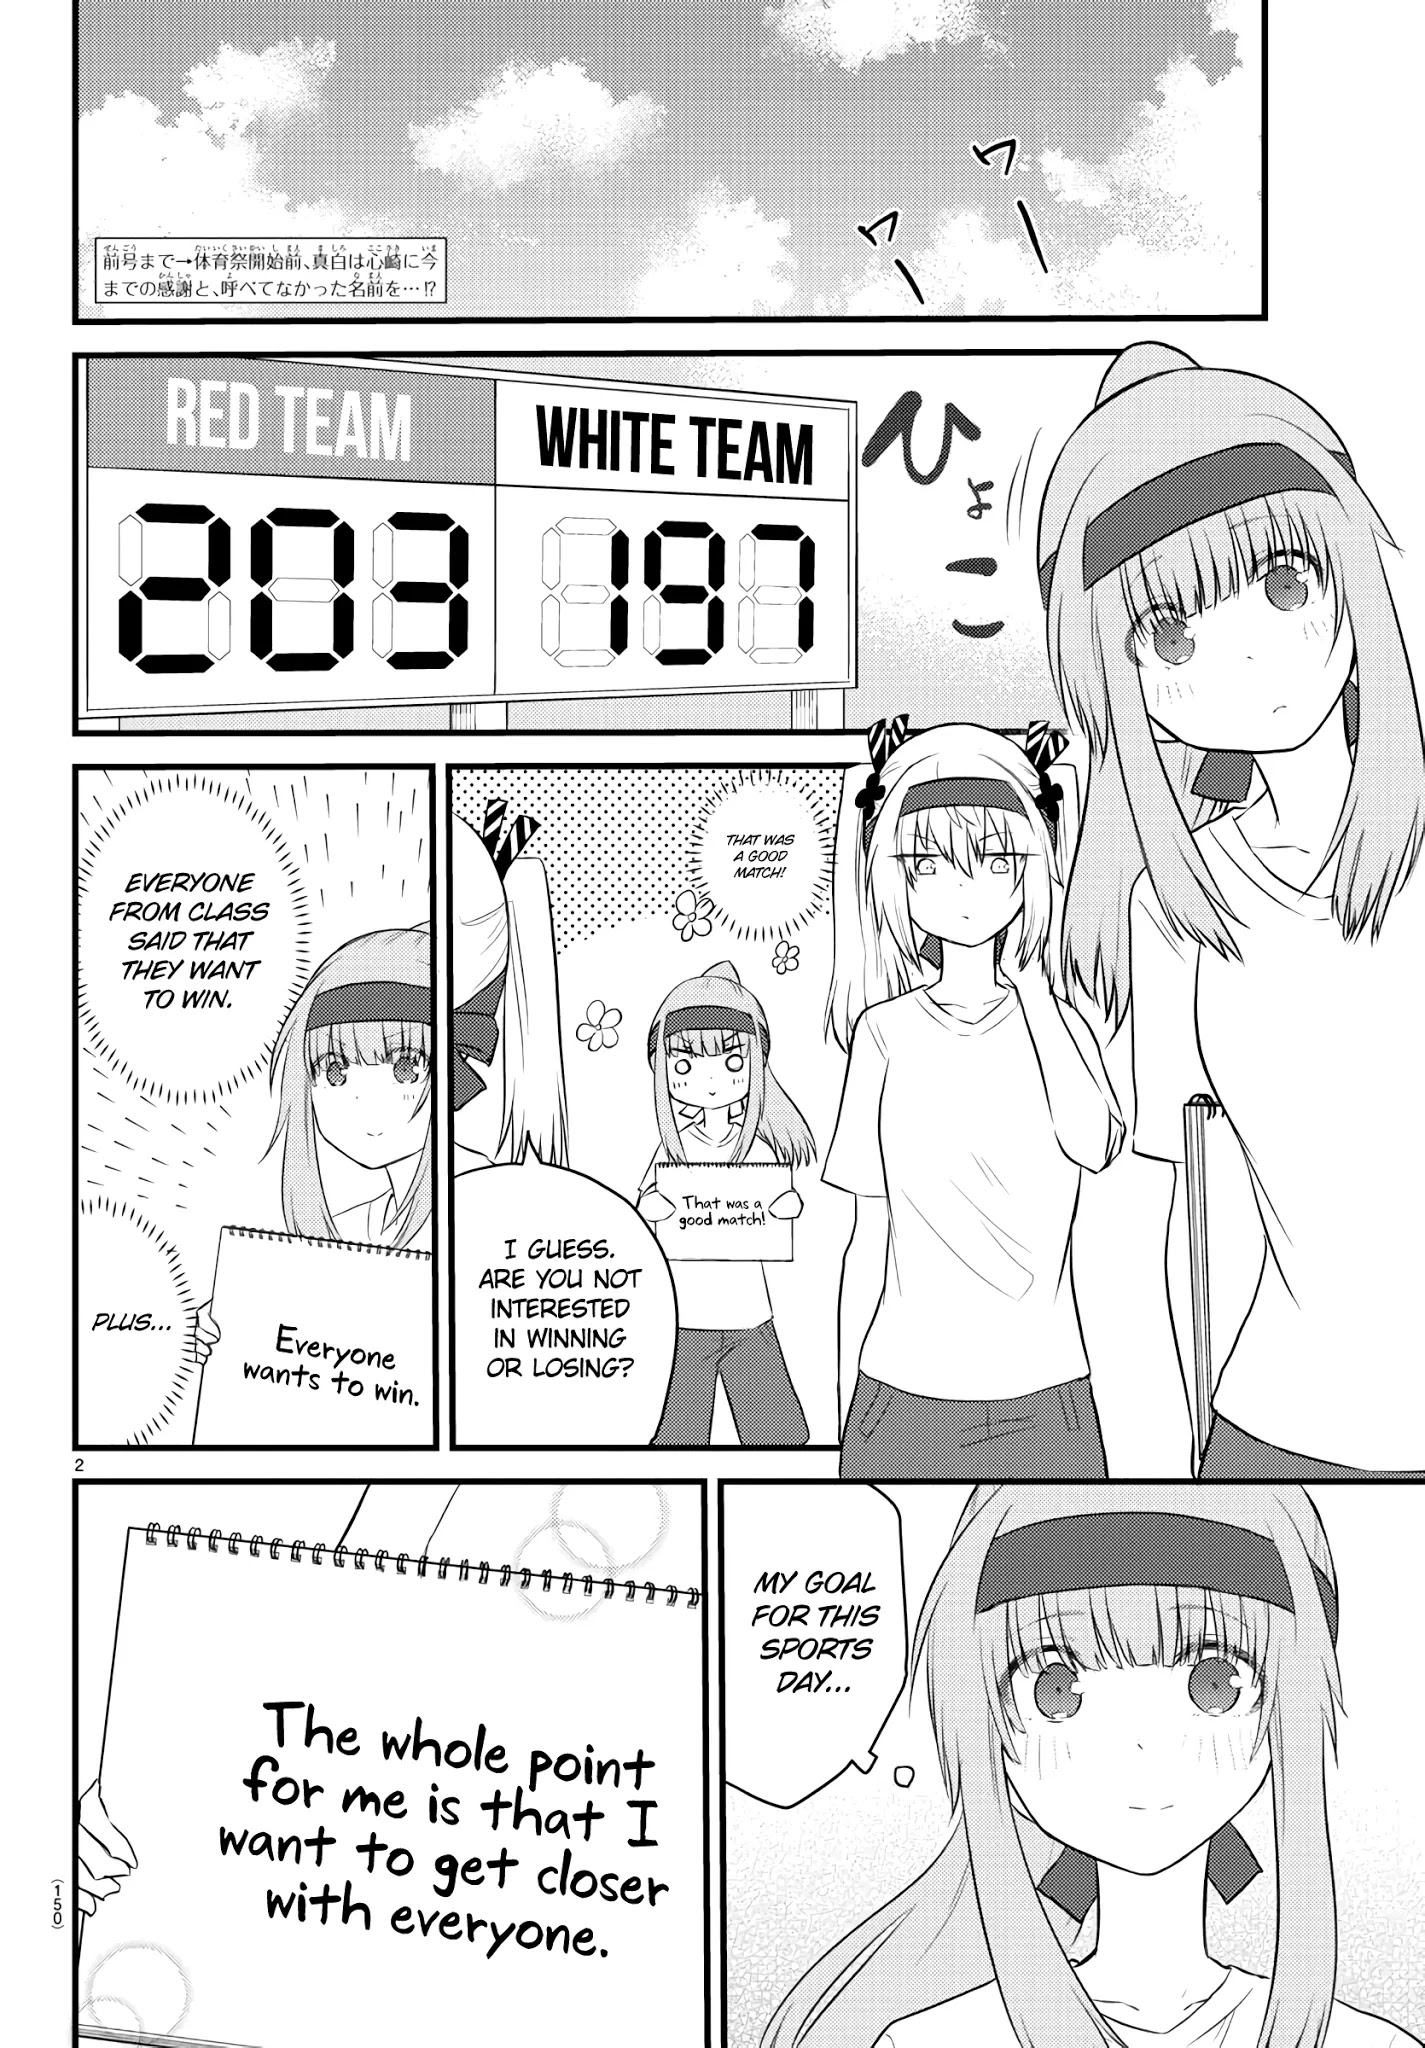 The Mute Girl And Her New Friend (Serialization) Chapter 34: Sports Day Begins - Picture 2